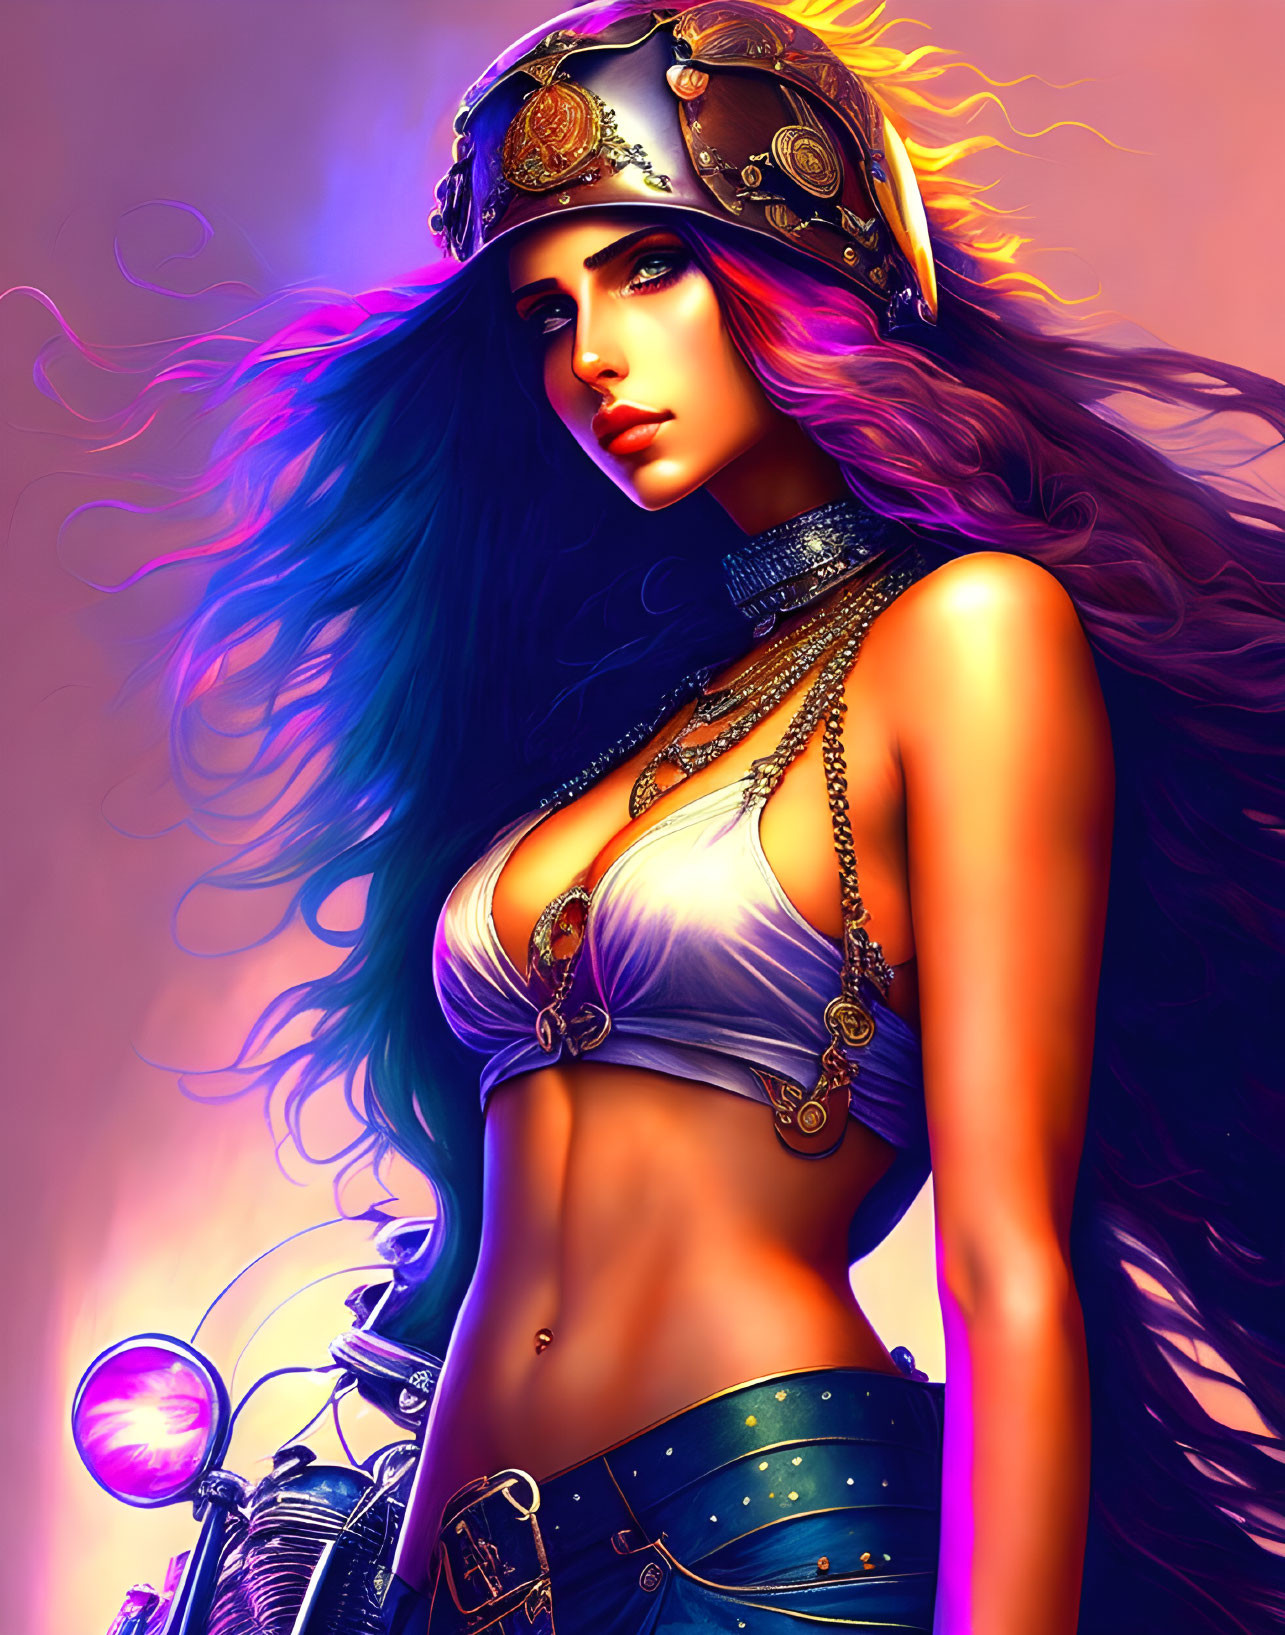 Colorful digital artwork of woman with purple hair and metallic hat in oriental-themed outfit.